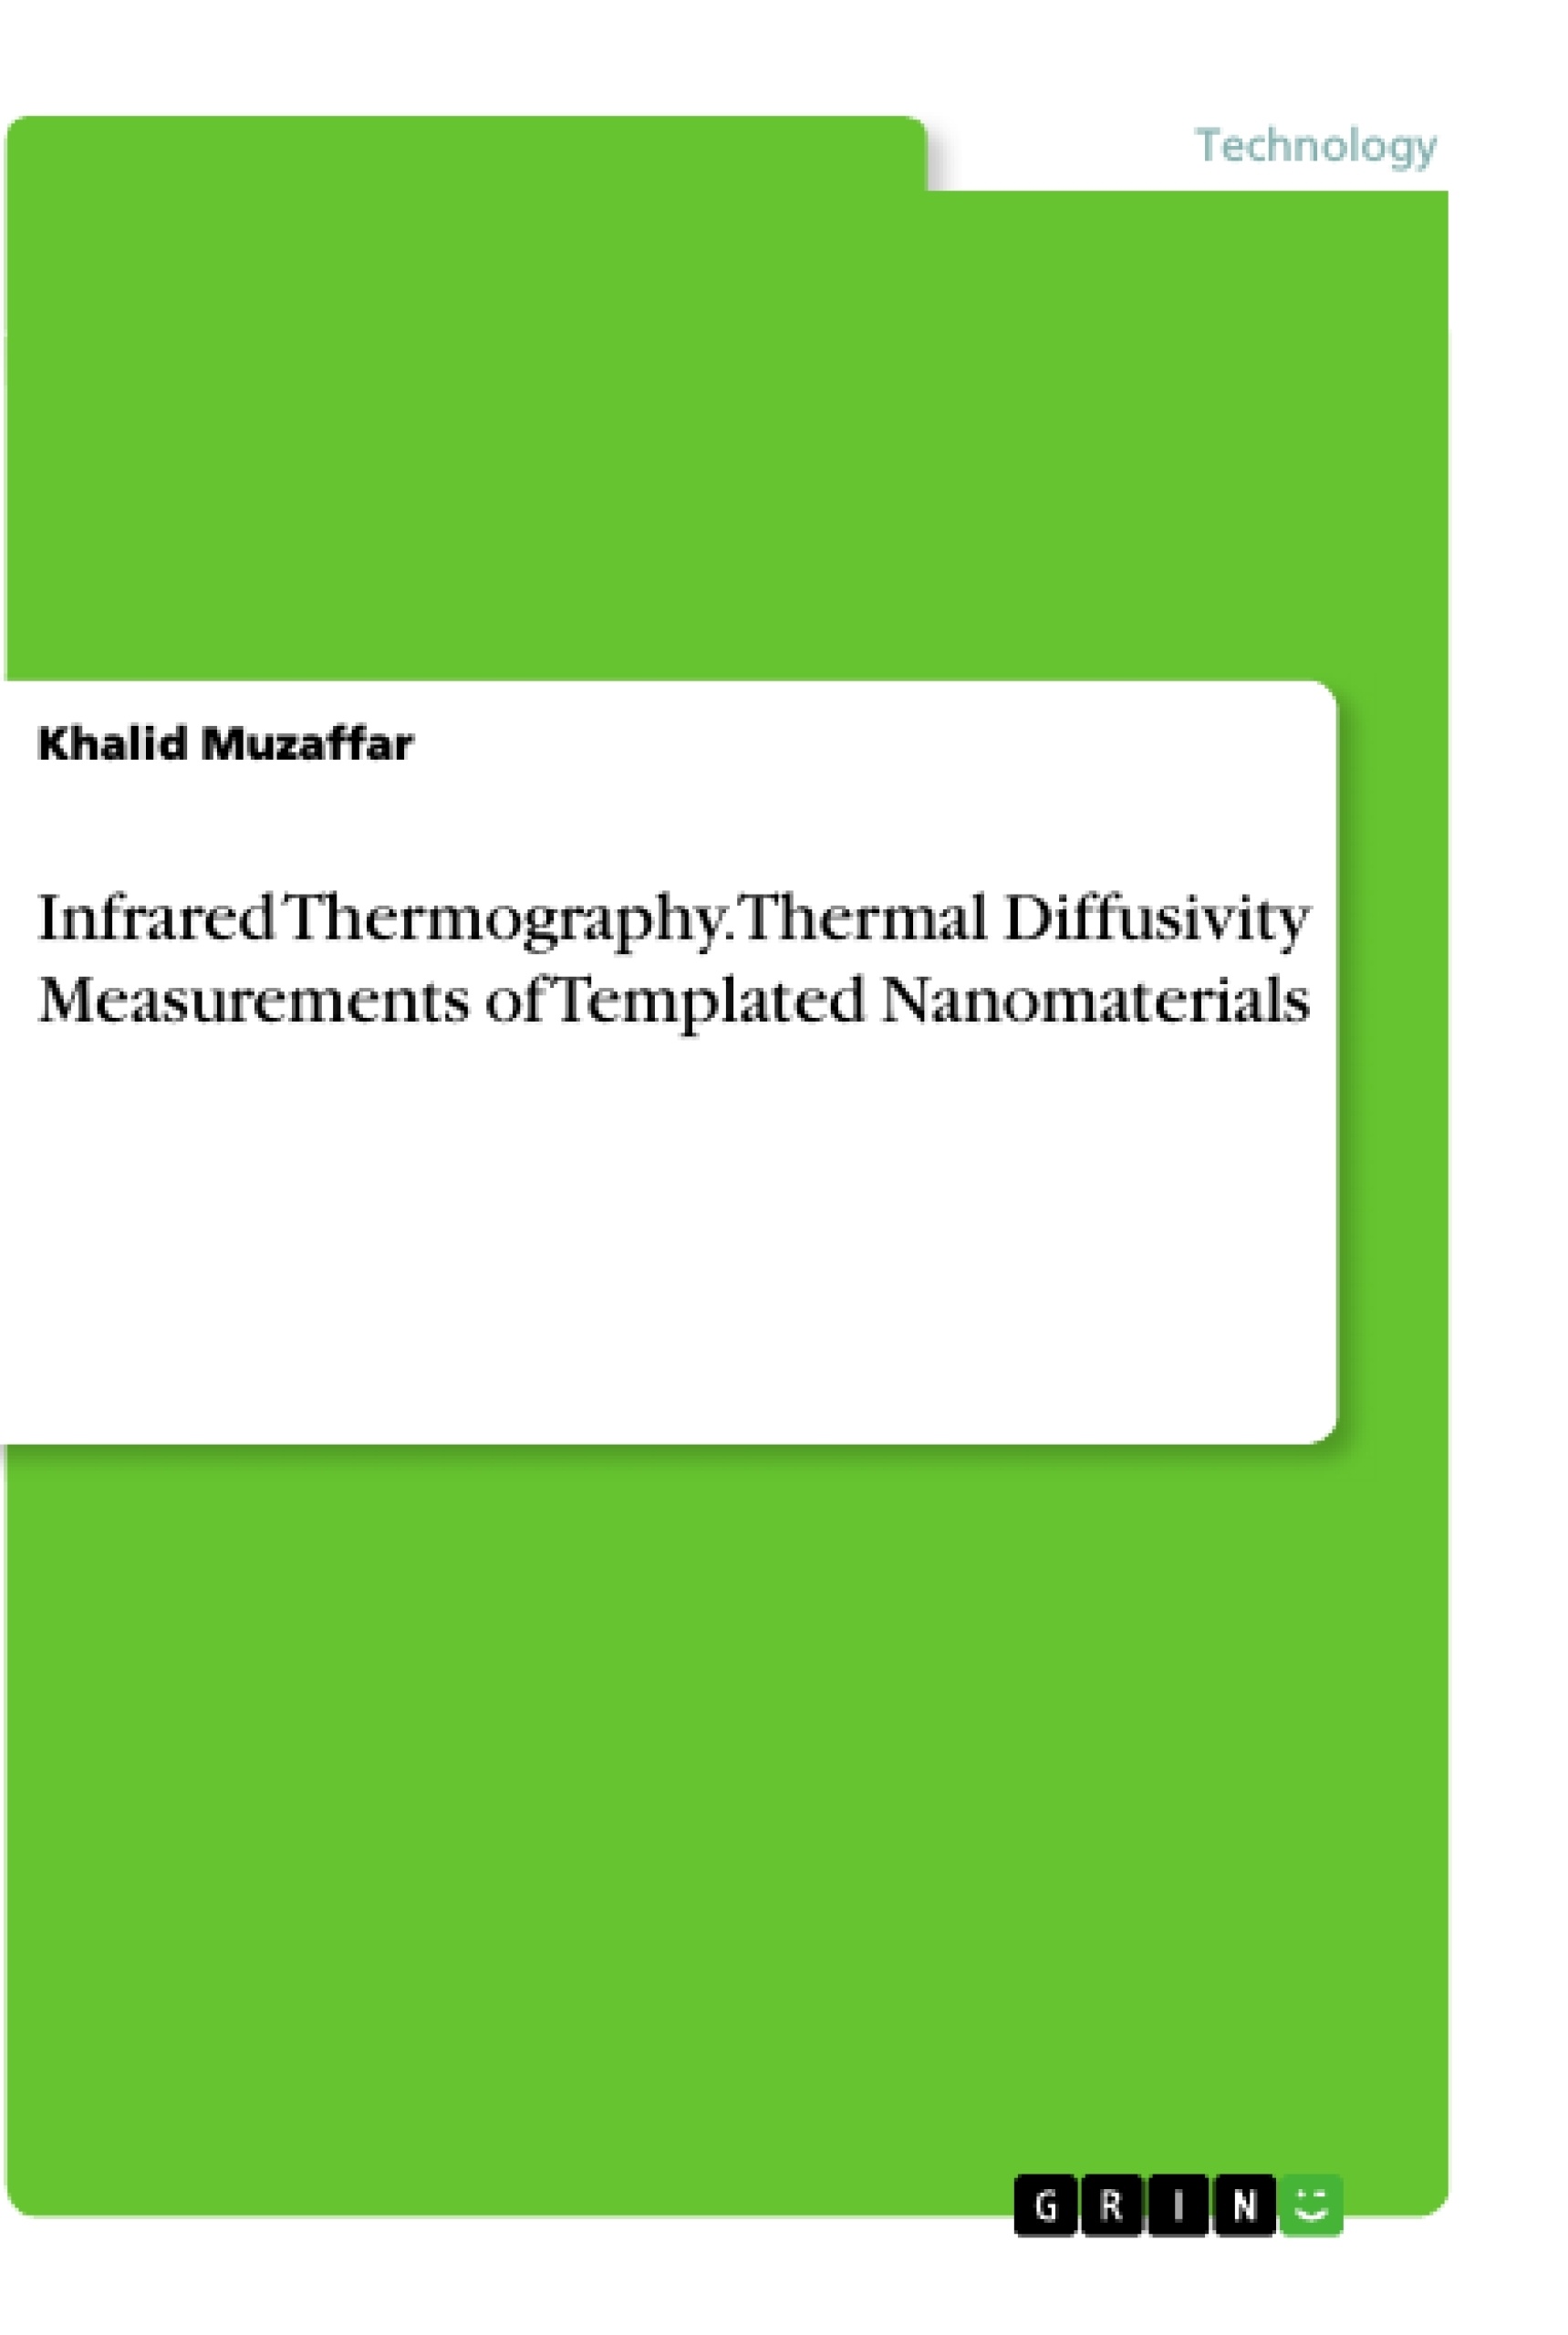 Título: Infrared Thermography. Thermal Diffusivity Measurements of Templated Nanomaterials